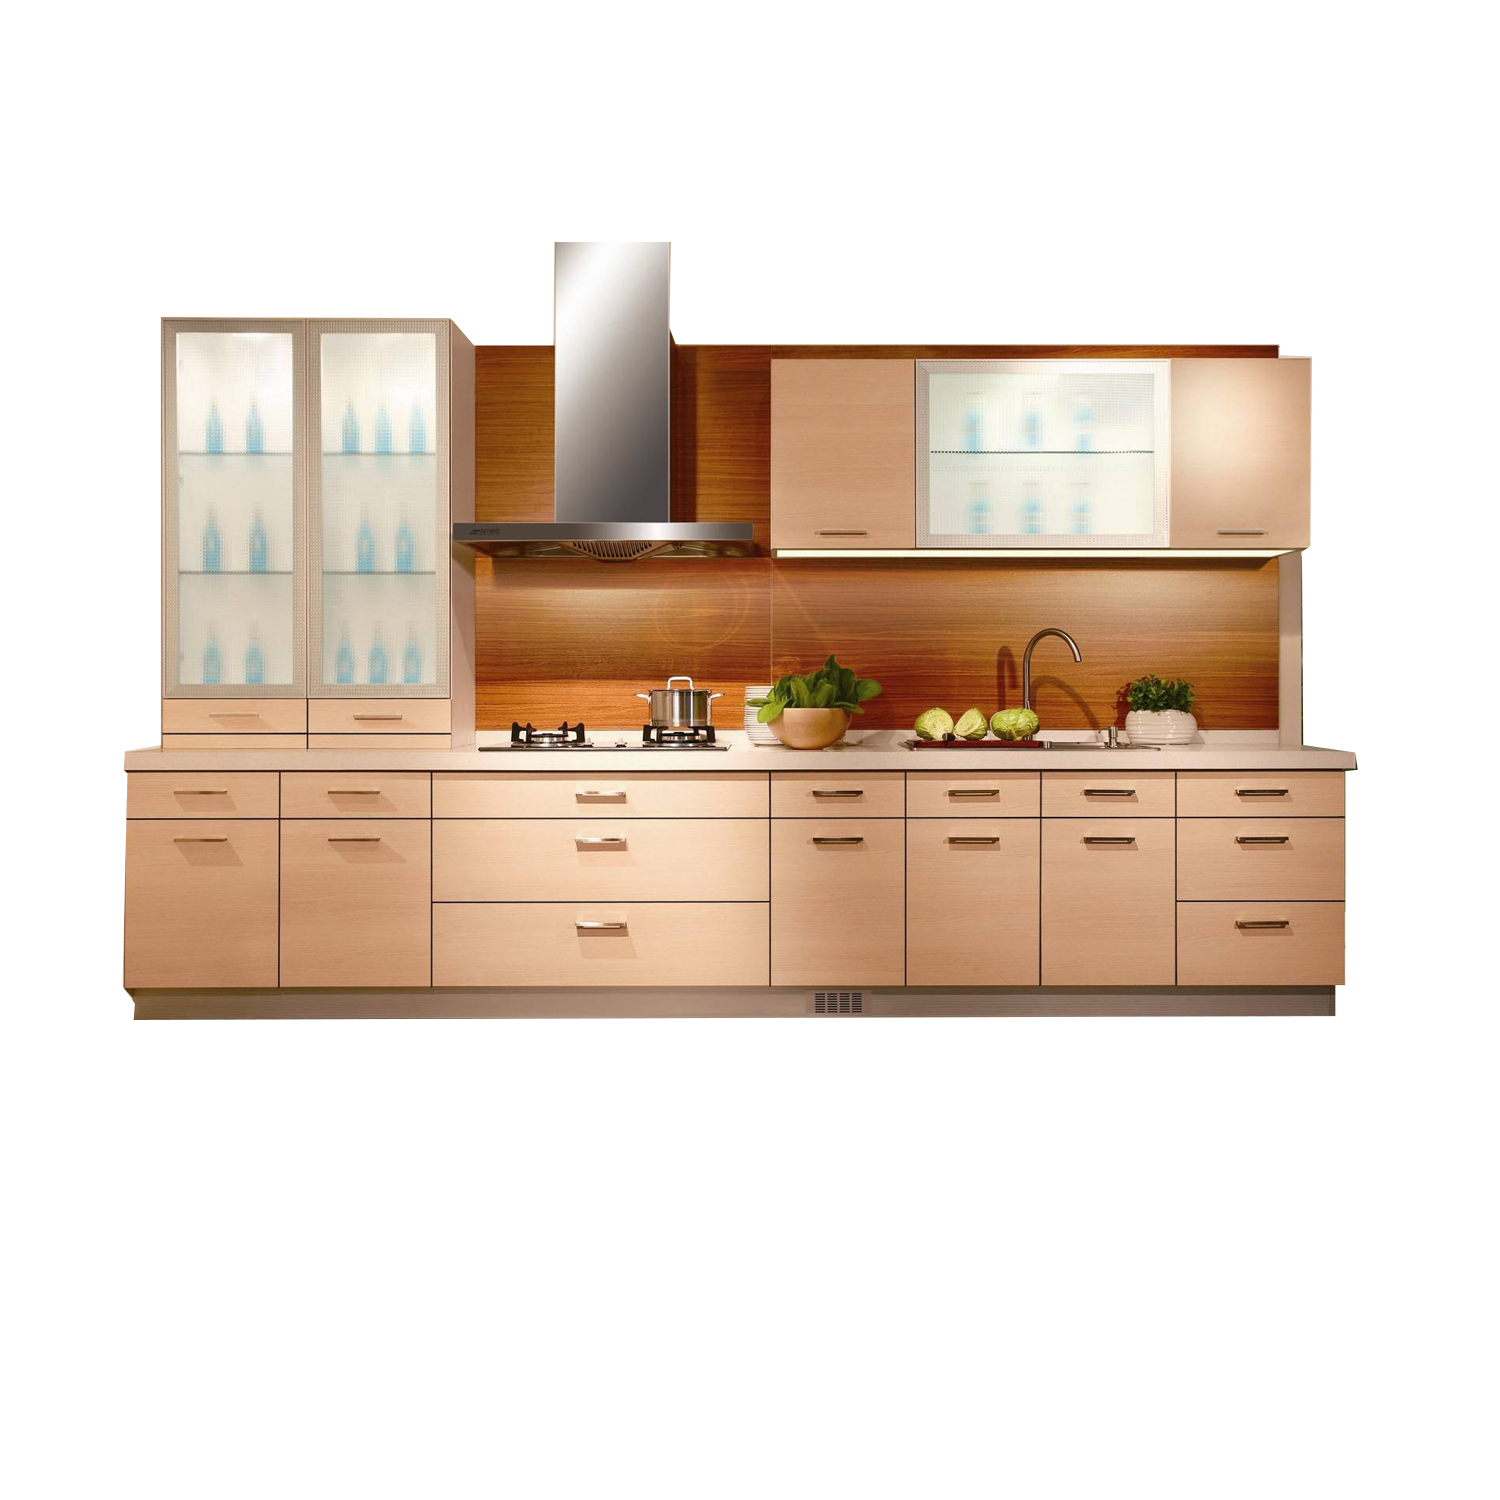 Interior Kitchen PNG Free Photo PNG Image